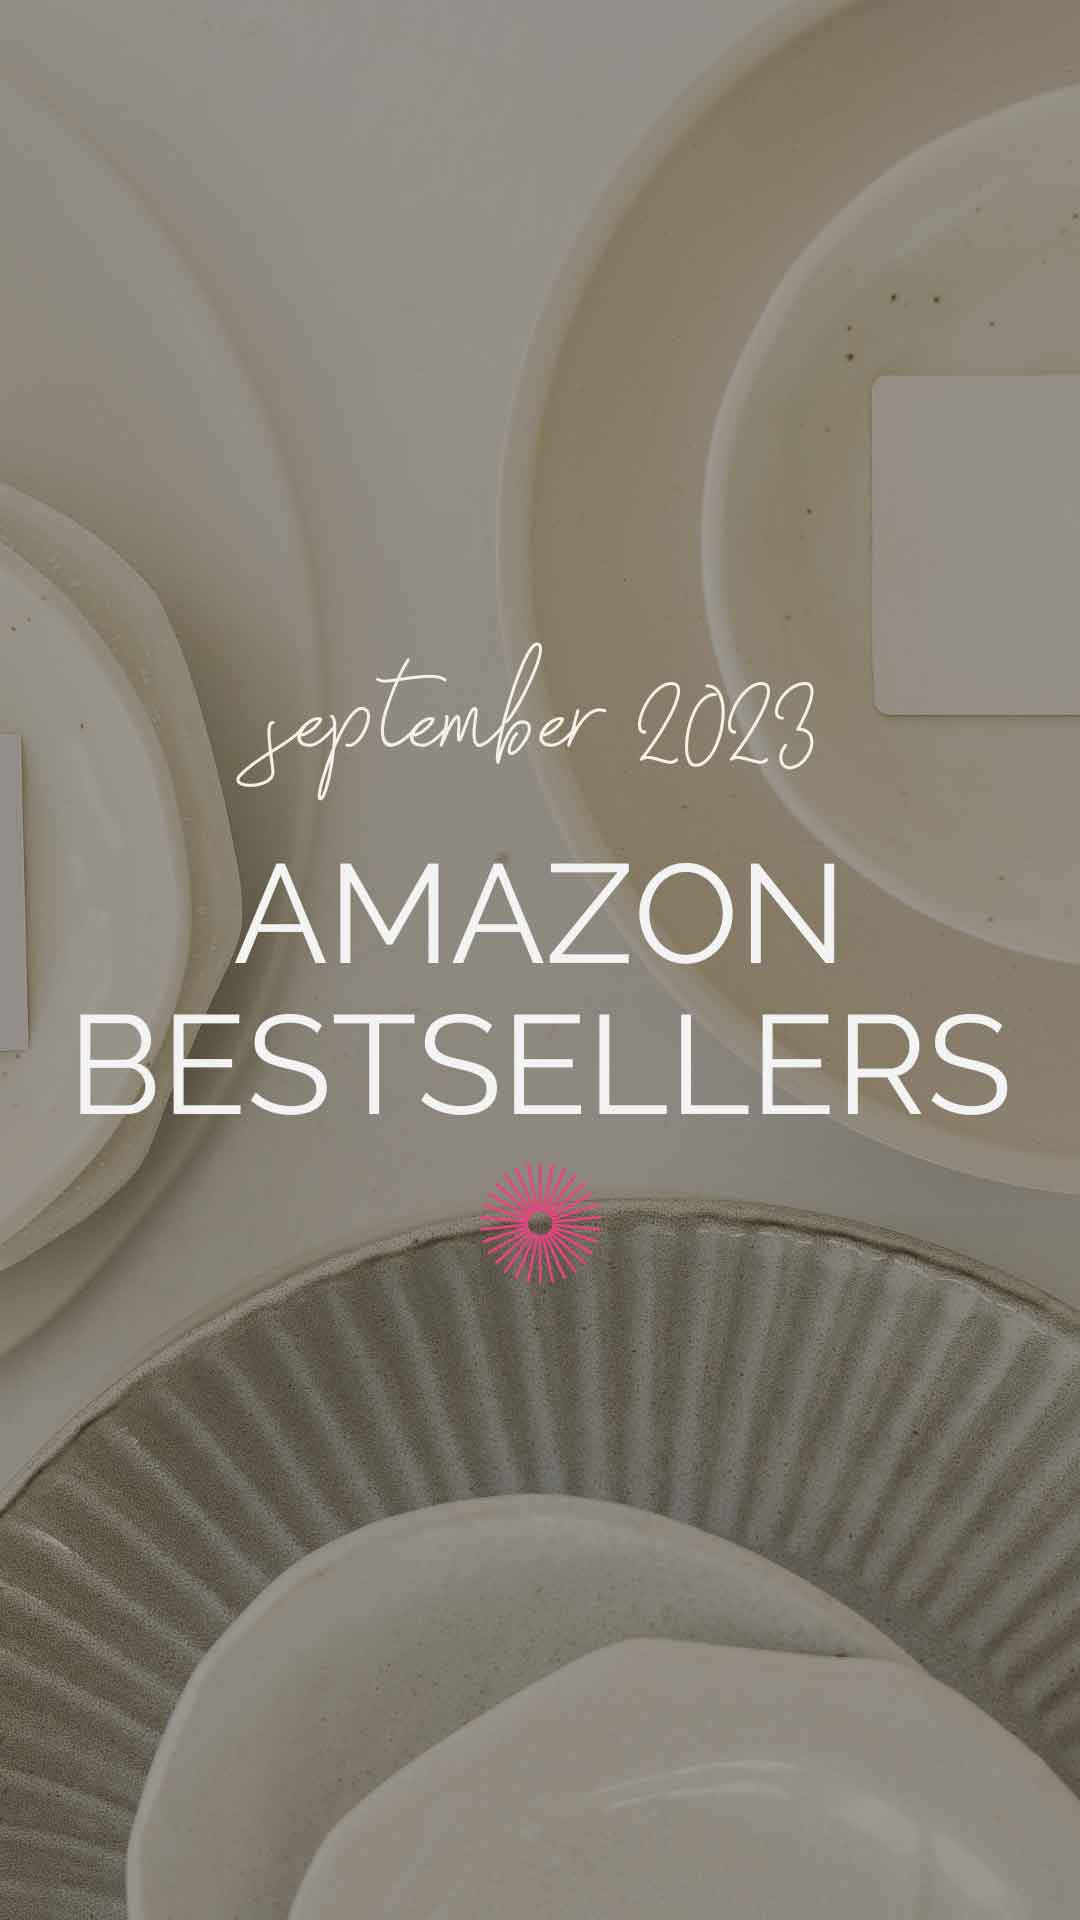 Beige plates with text overlay "September 2023 Amazon Bestsellers".